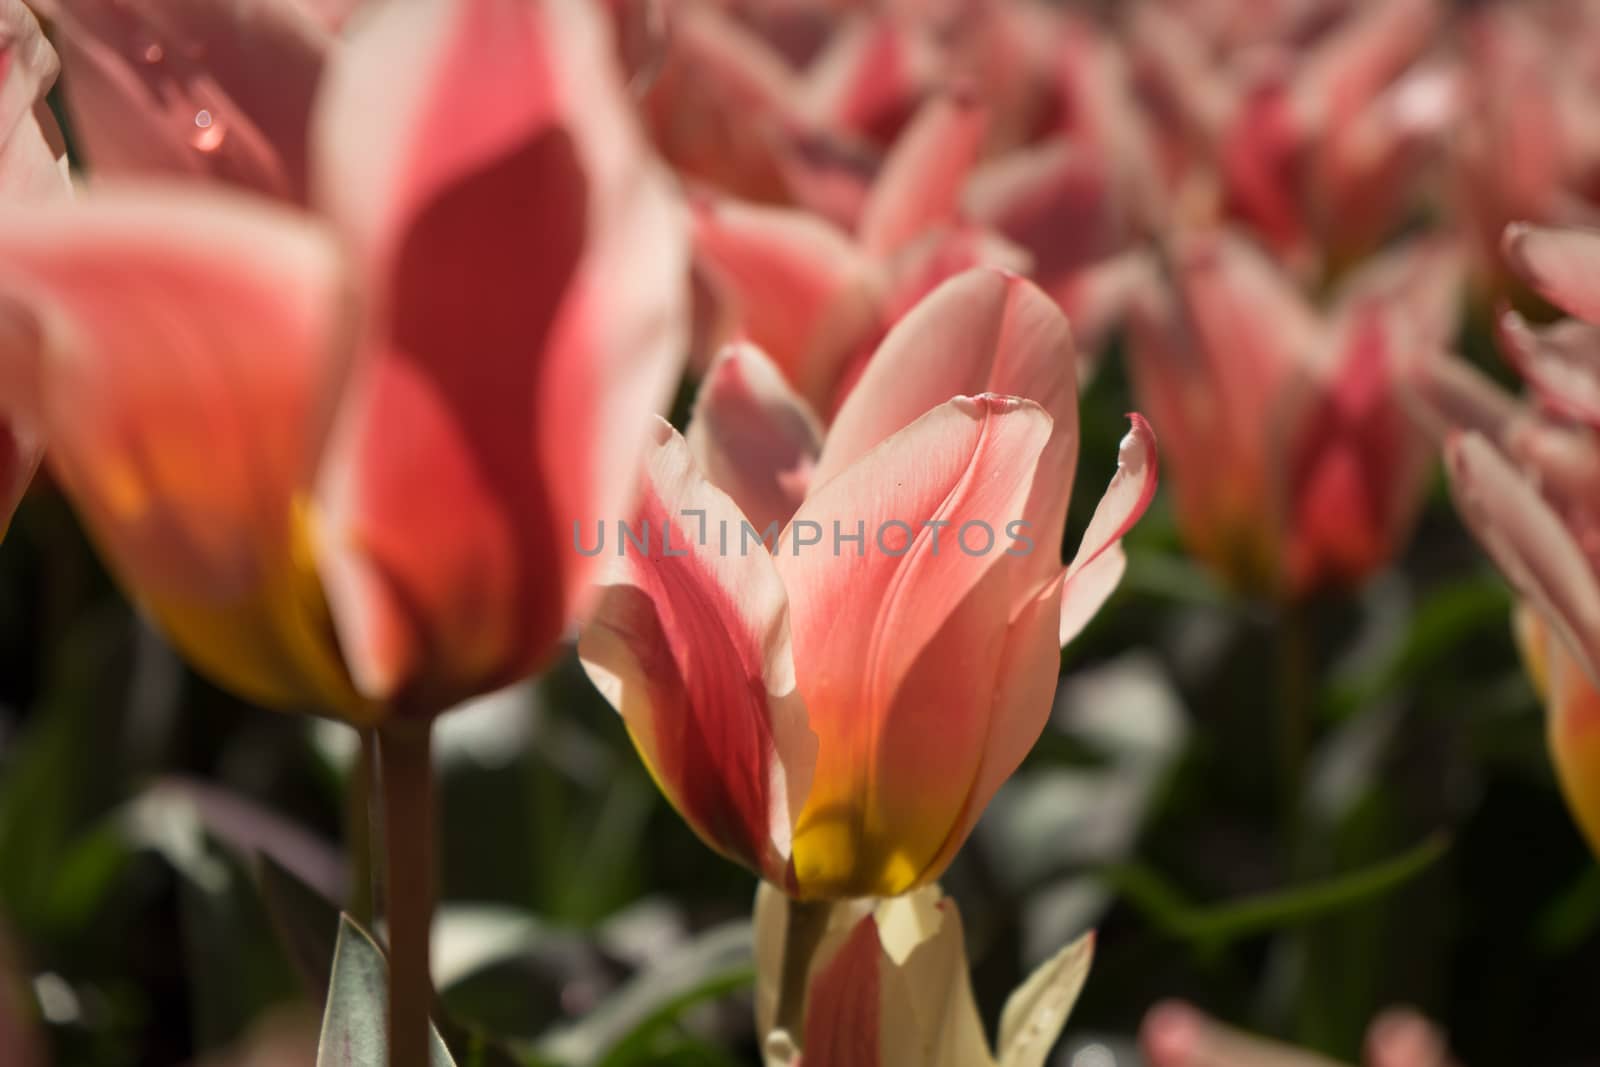 Red tulips in a garden in Lisse, Netherlands, Europe by ramana16